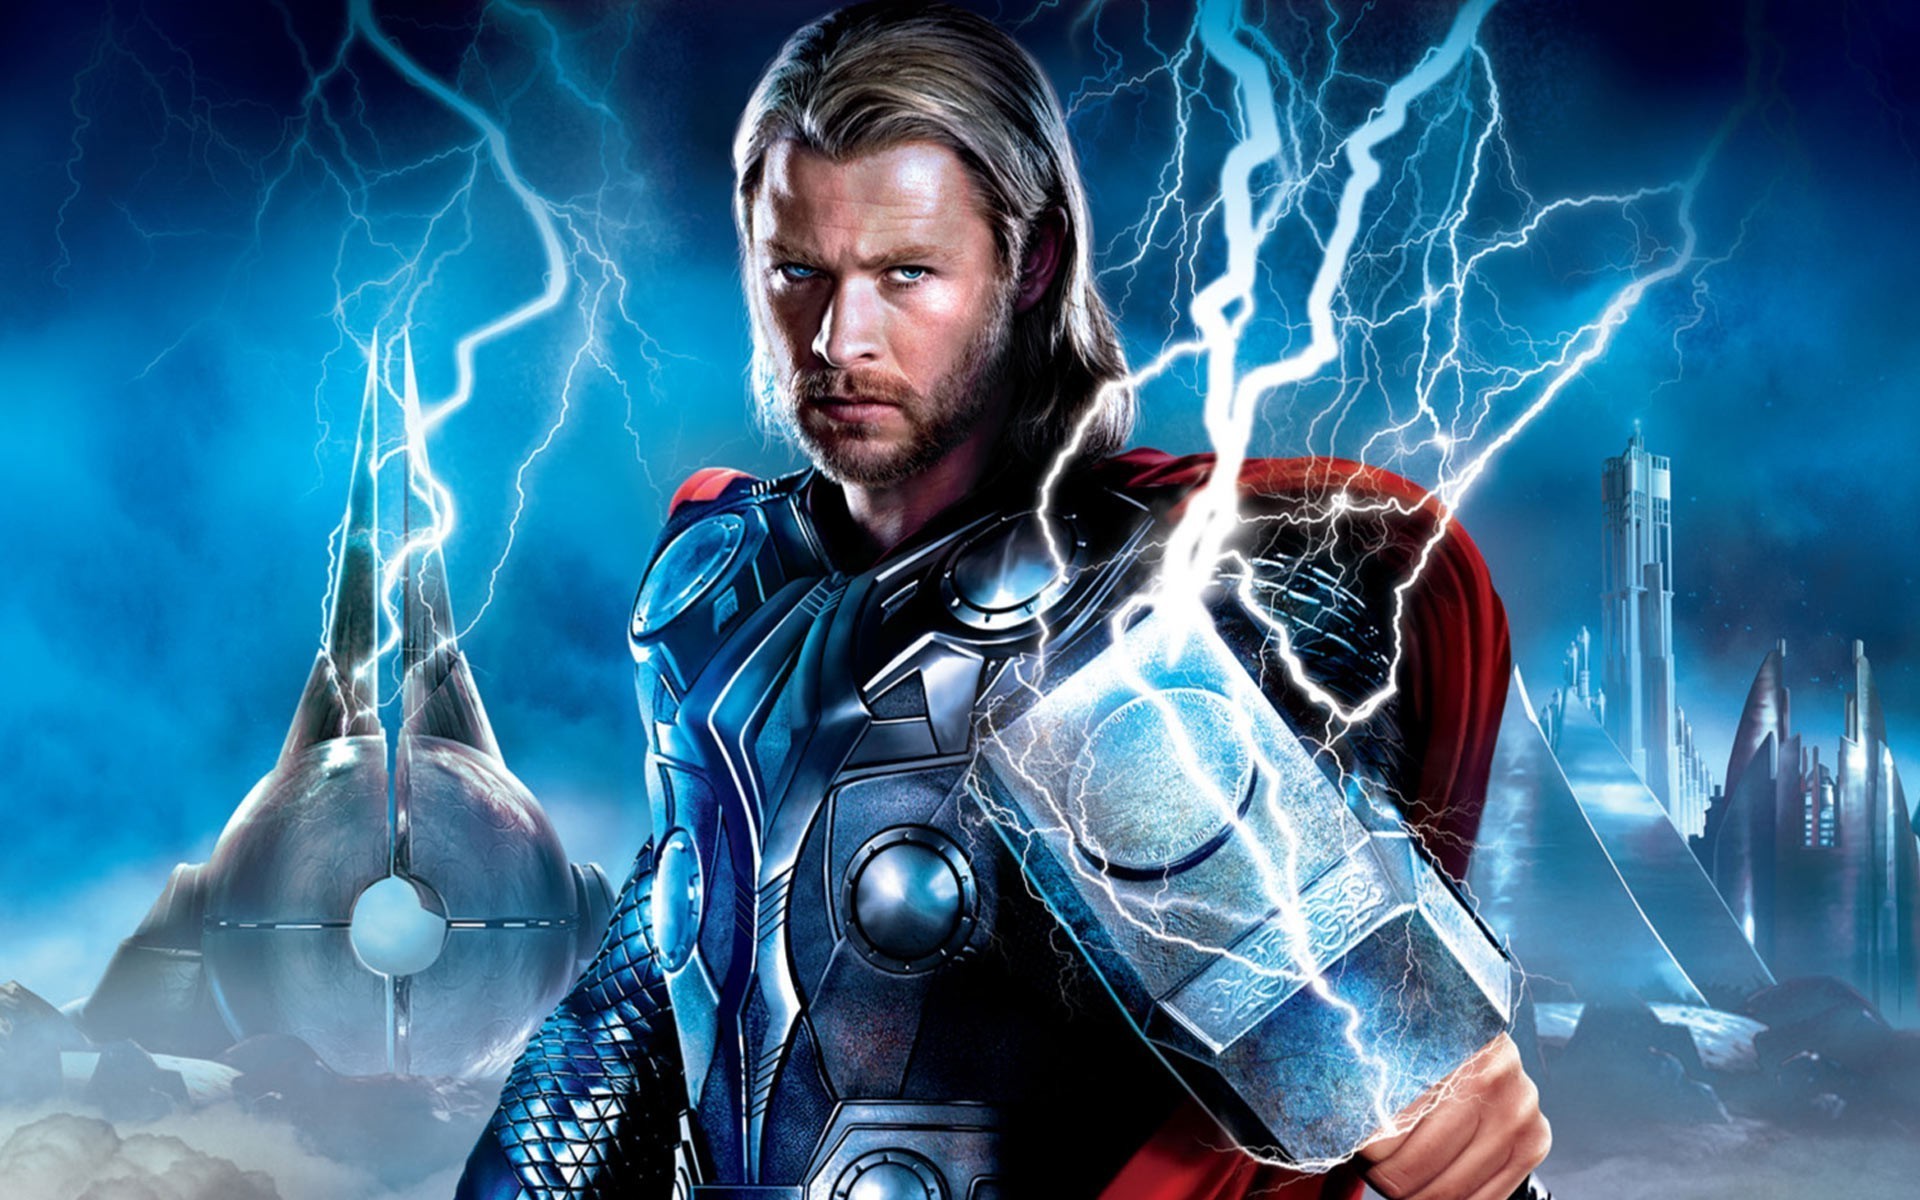 1920x1200 Related Wallpapers from Inception Wallpaper. Thor